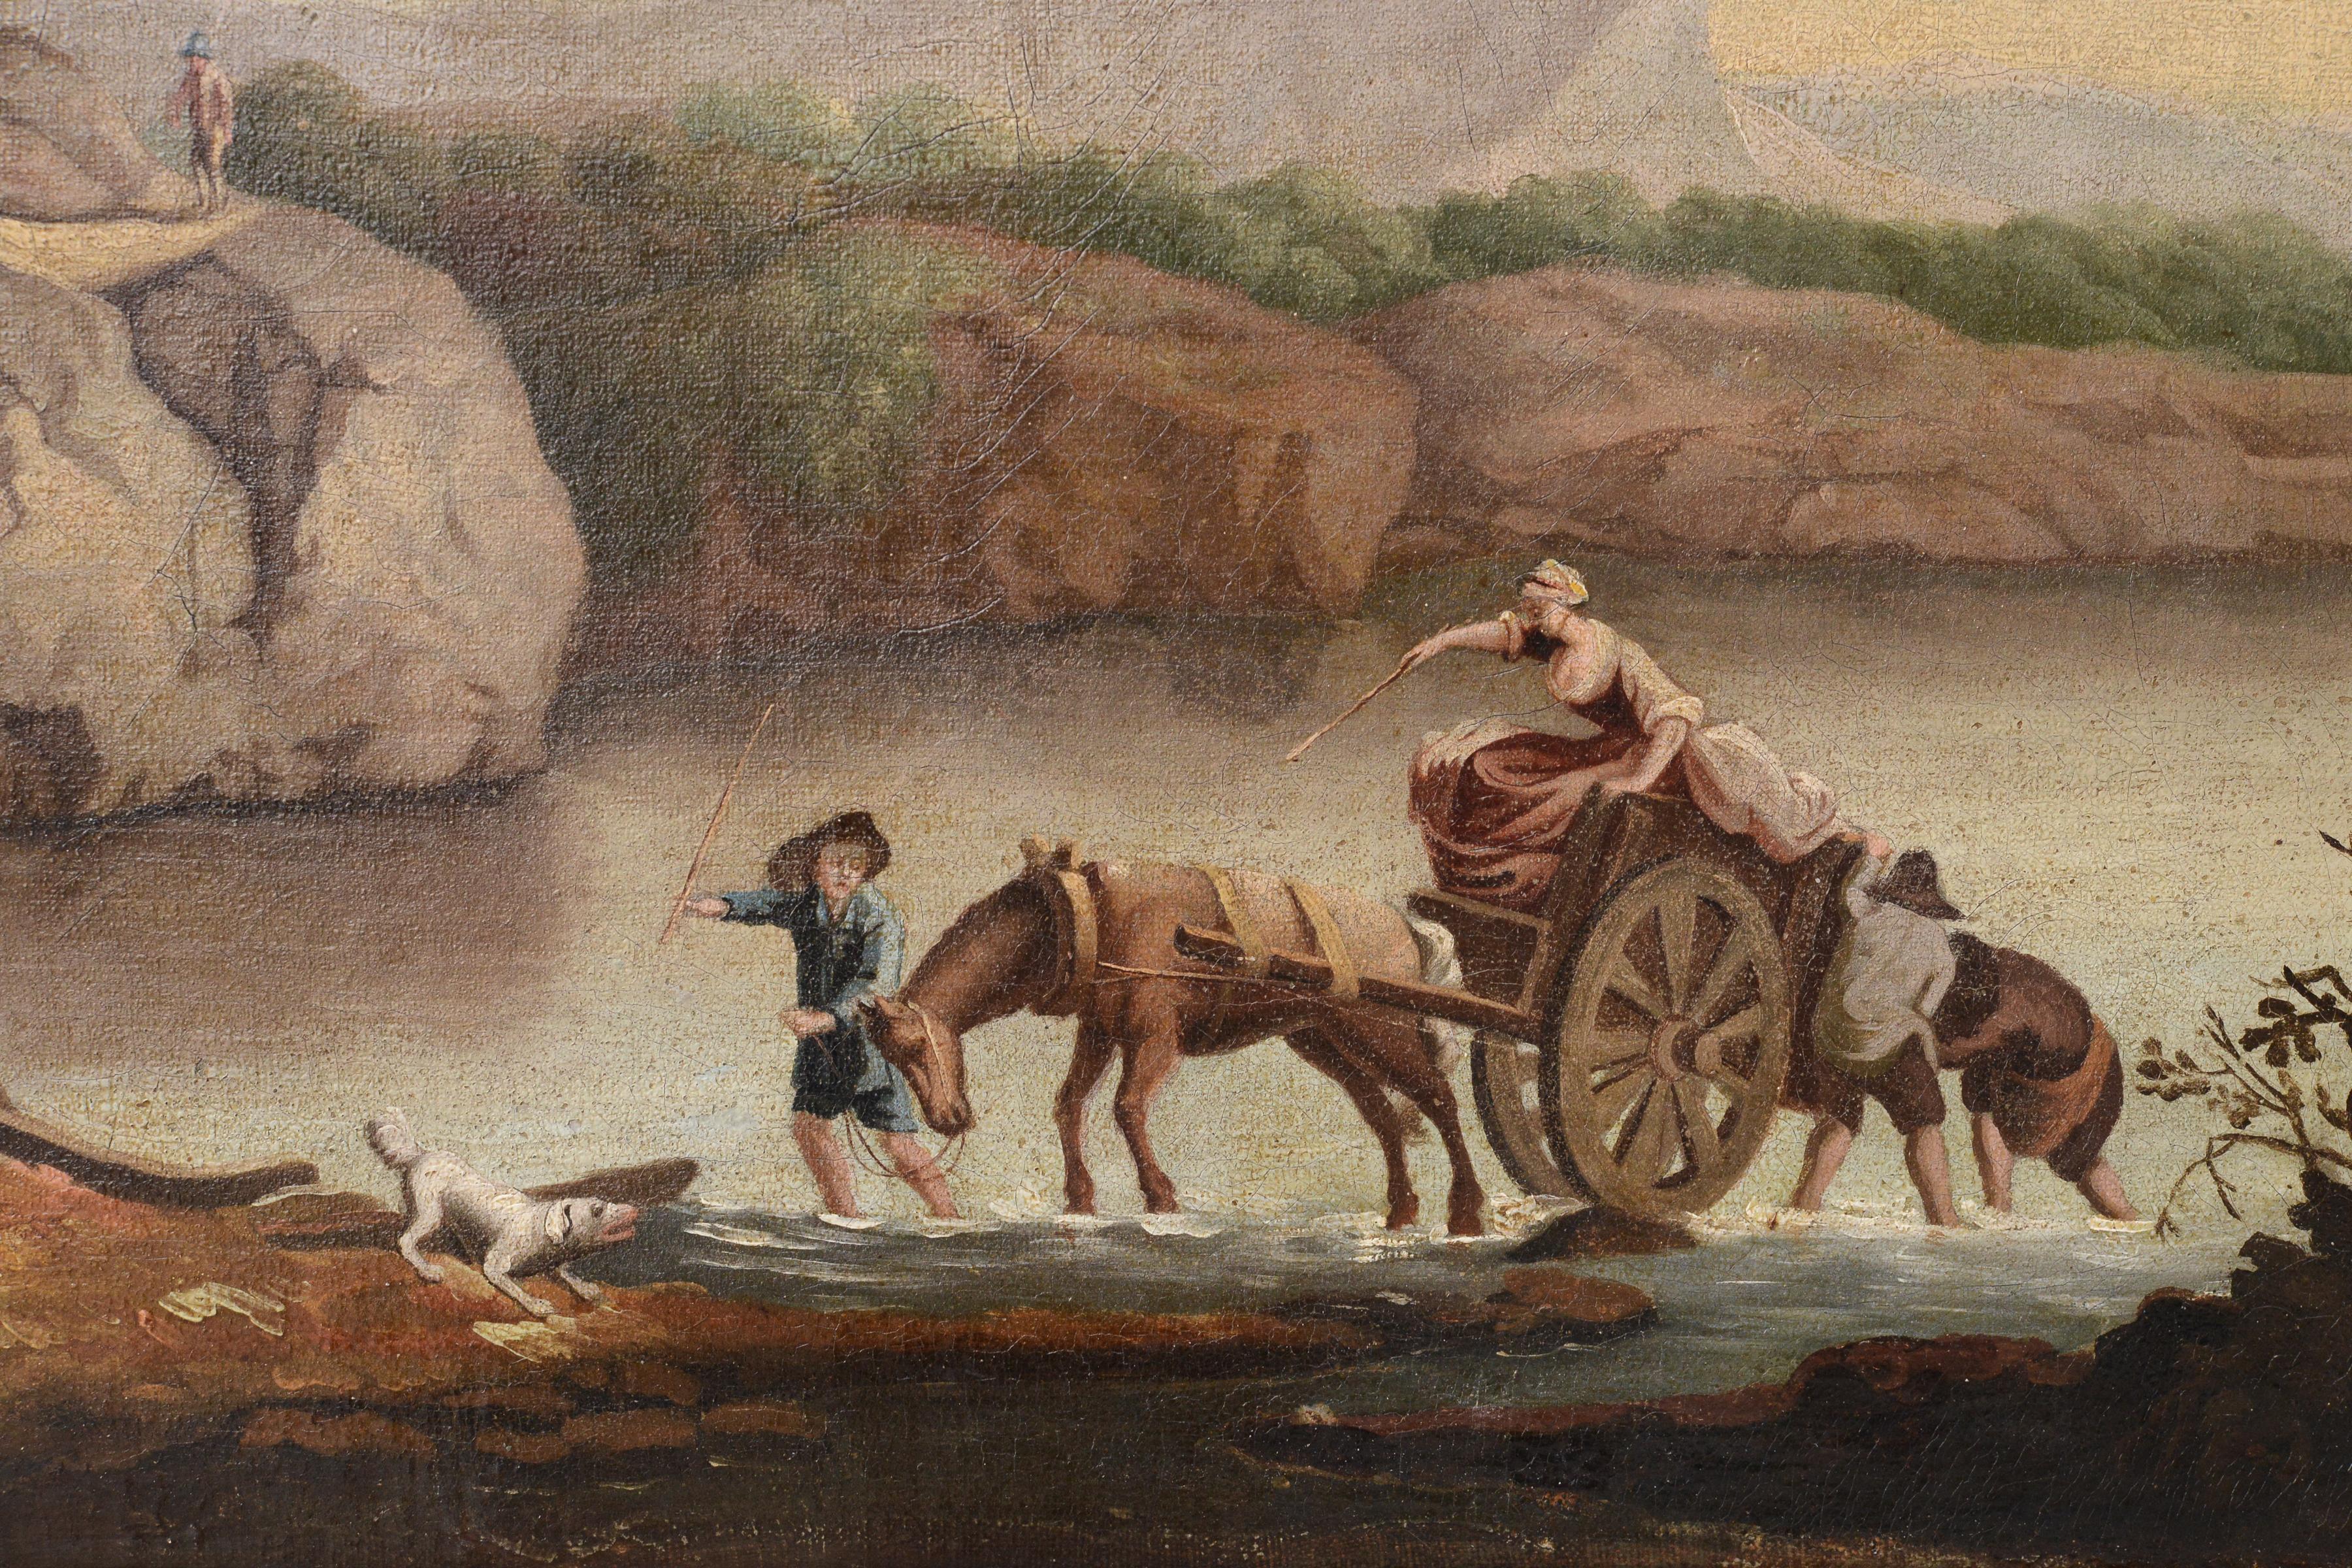 As we gaze upon at this artwork, our eyes are immediately drawn to the foreground where a comical spectacle unfolds before us. A carriage, stubbornly stuck in the midst of a ford, serves as the focal point of the scene unfolding. A woman, exuding